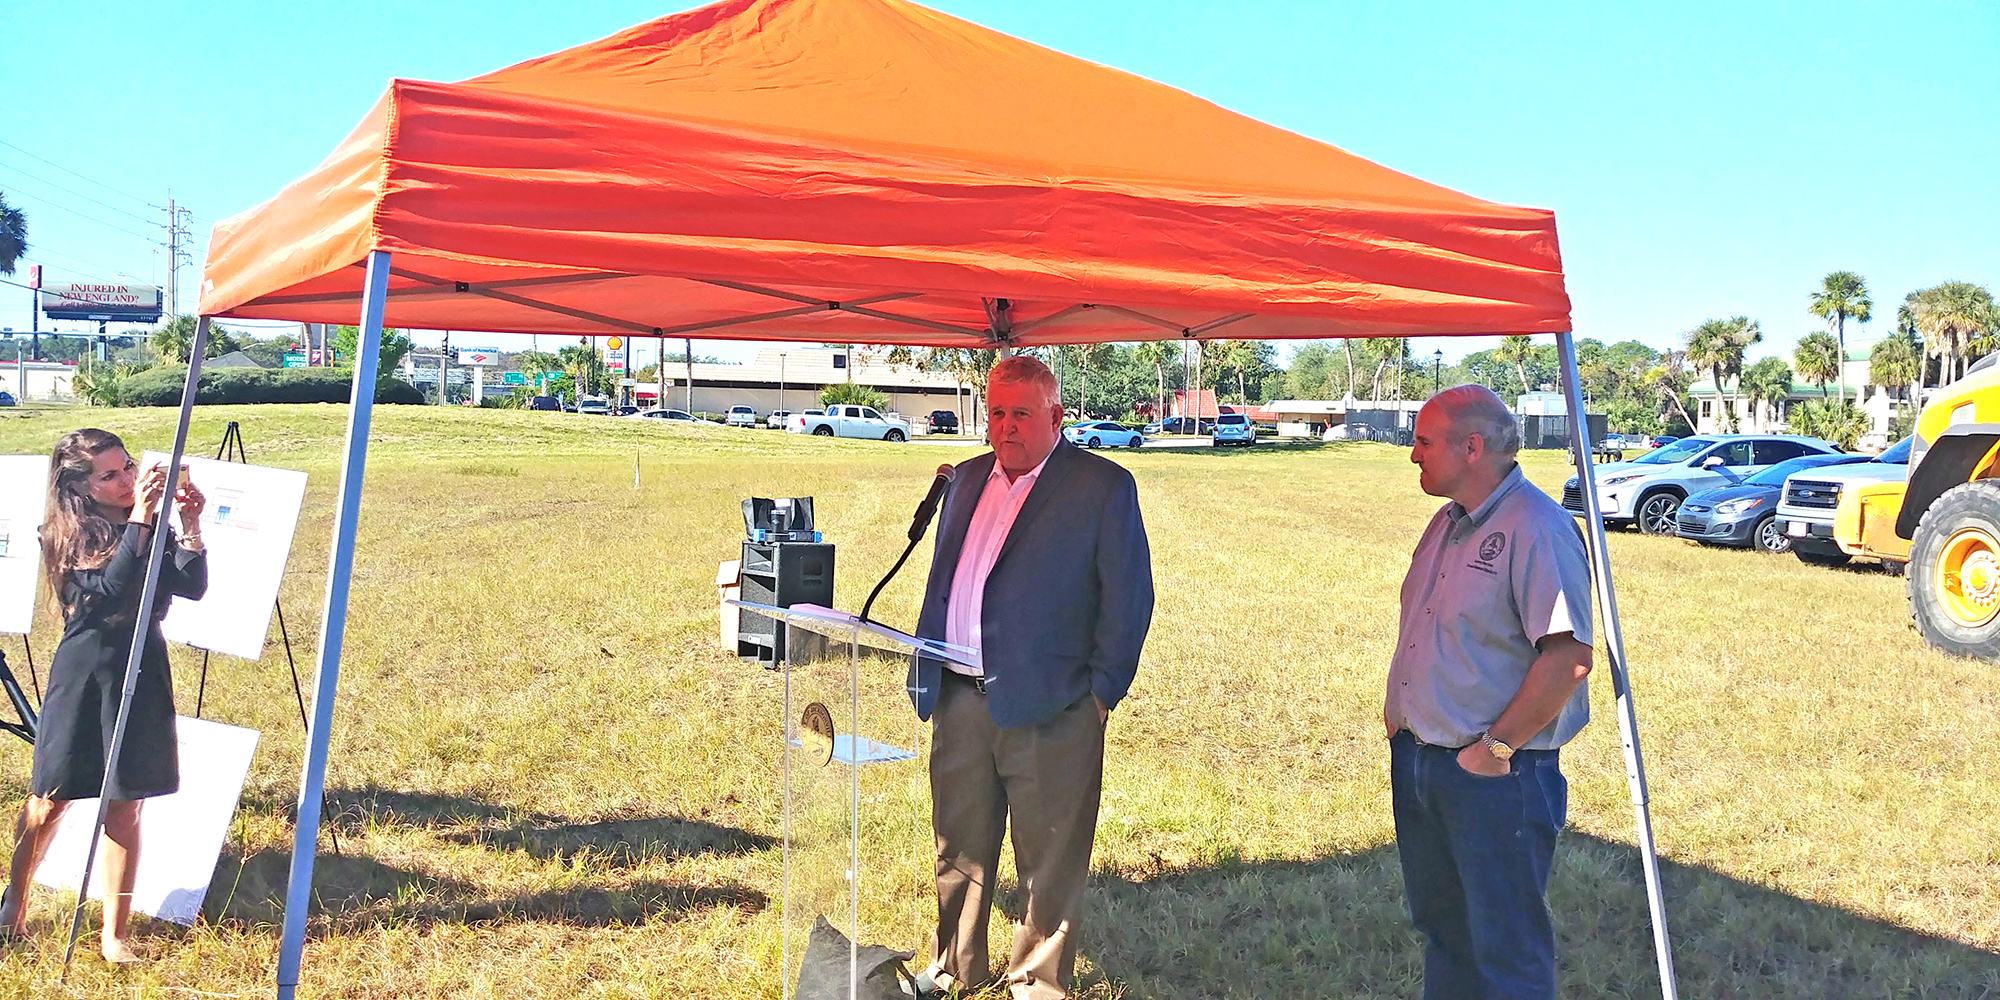 John Joyce, managing member of Joyce Development talks about the project while District 11 City Council member Danny Becton watches.